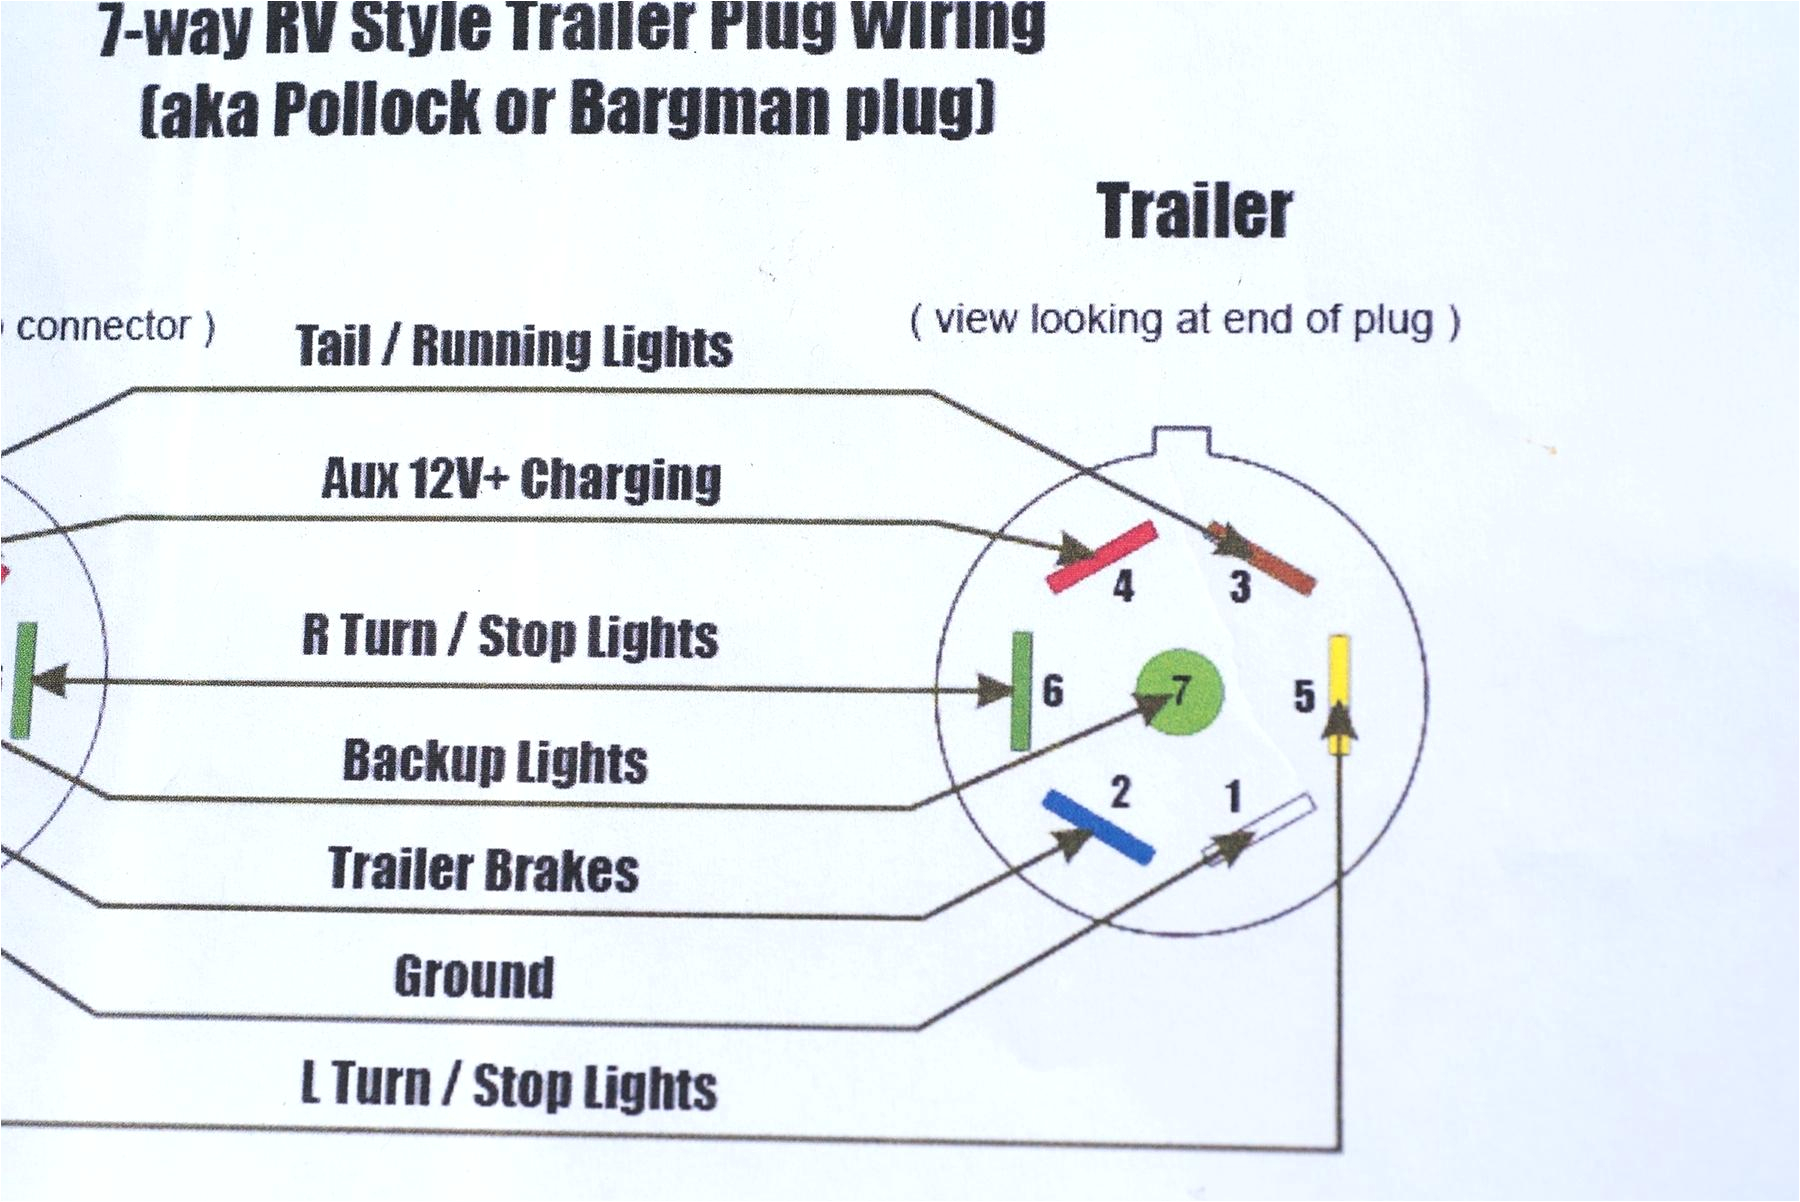 2 pin wire harness diagram wiring diagram name 2 pin trailer wiring harness wiring diagram expert